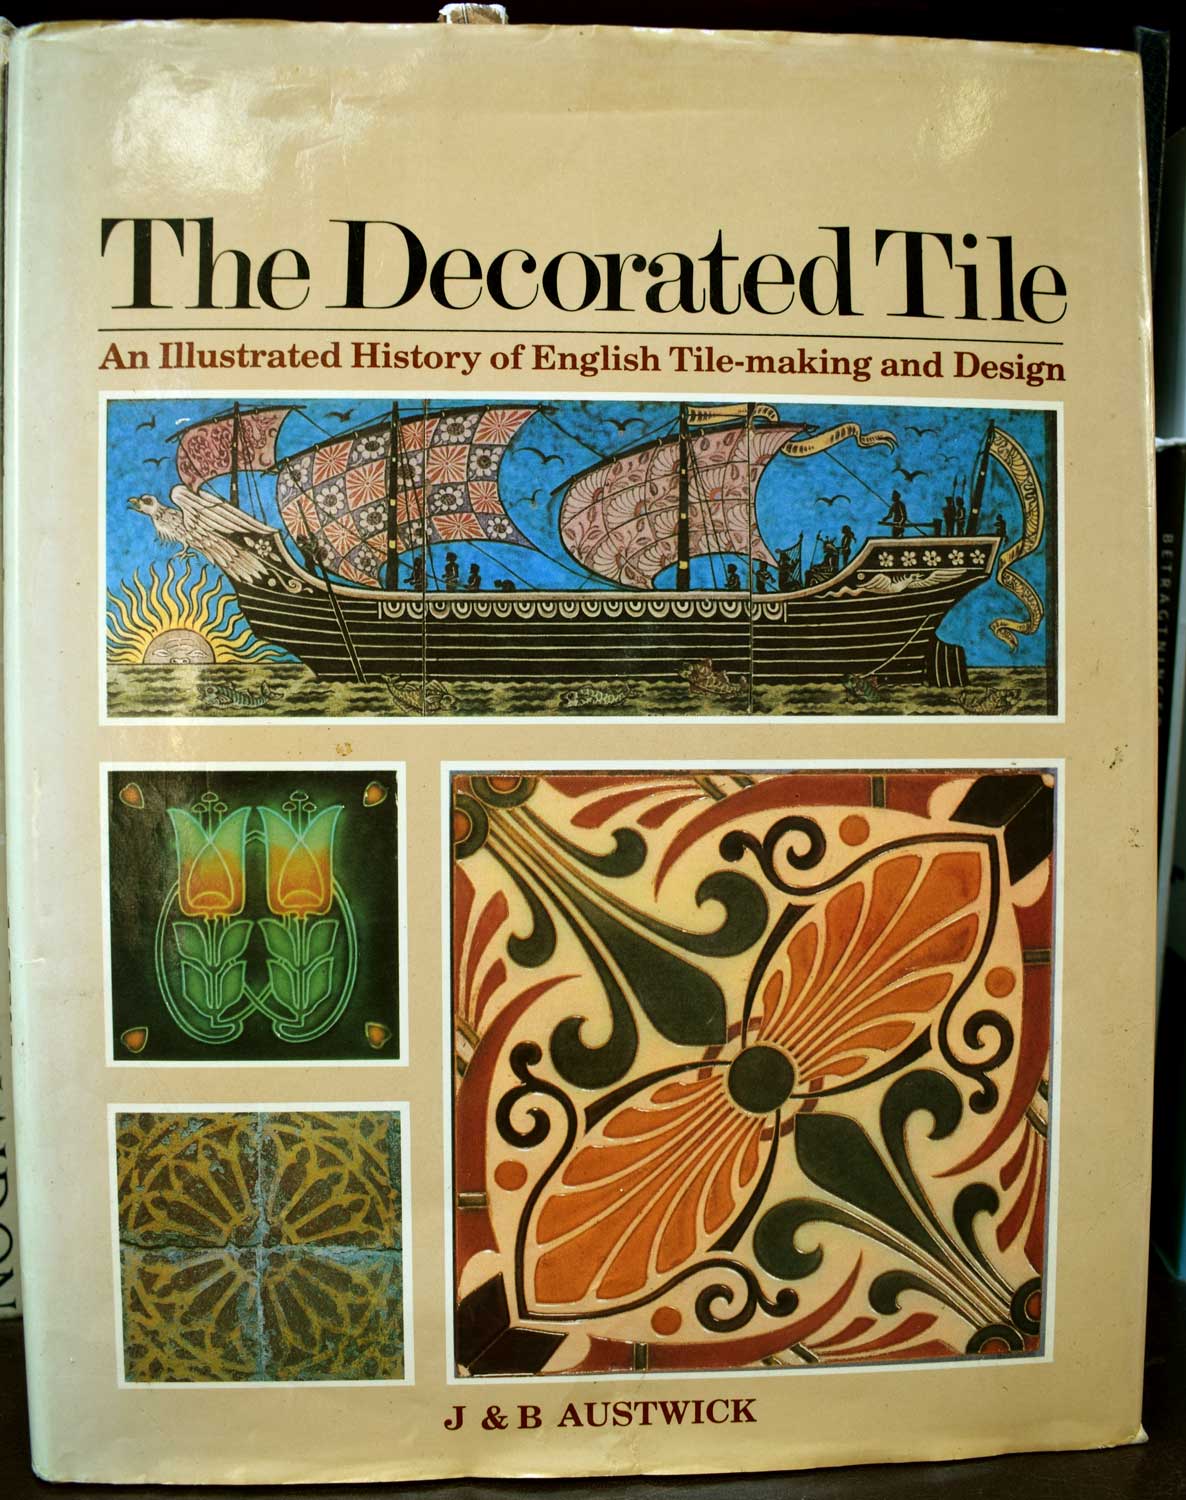 The Decorated Tile. An Illustrated History of English Tile-Making and Design. Signed copy.